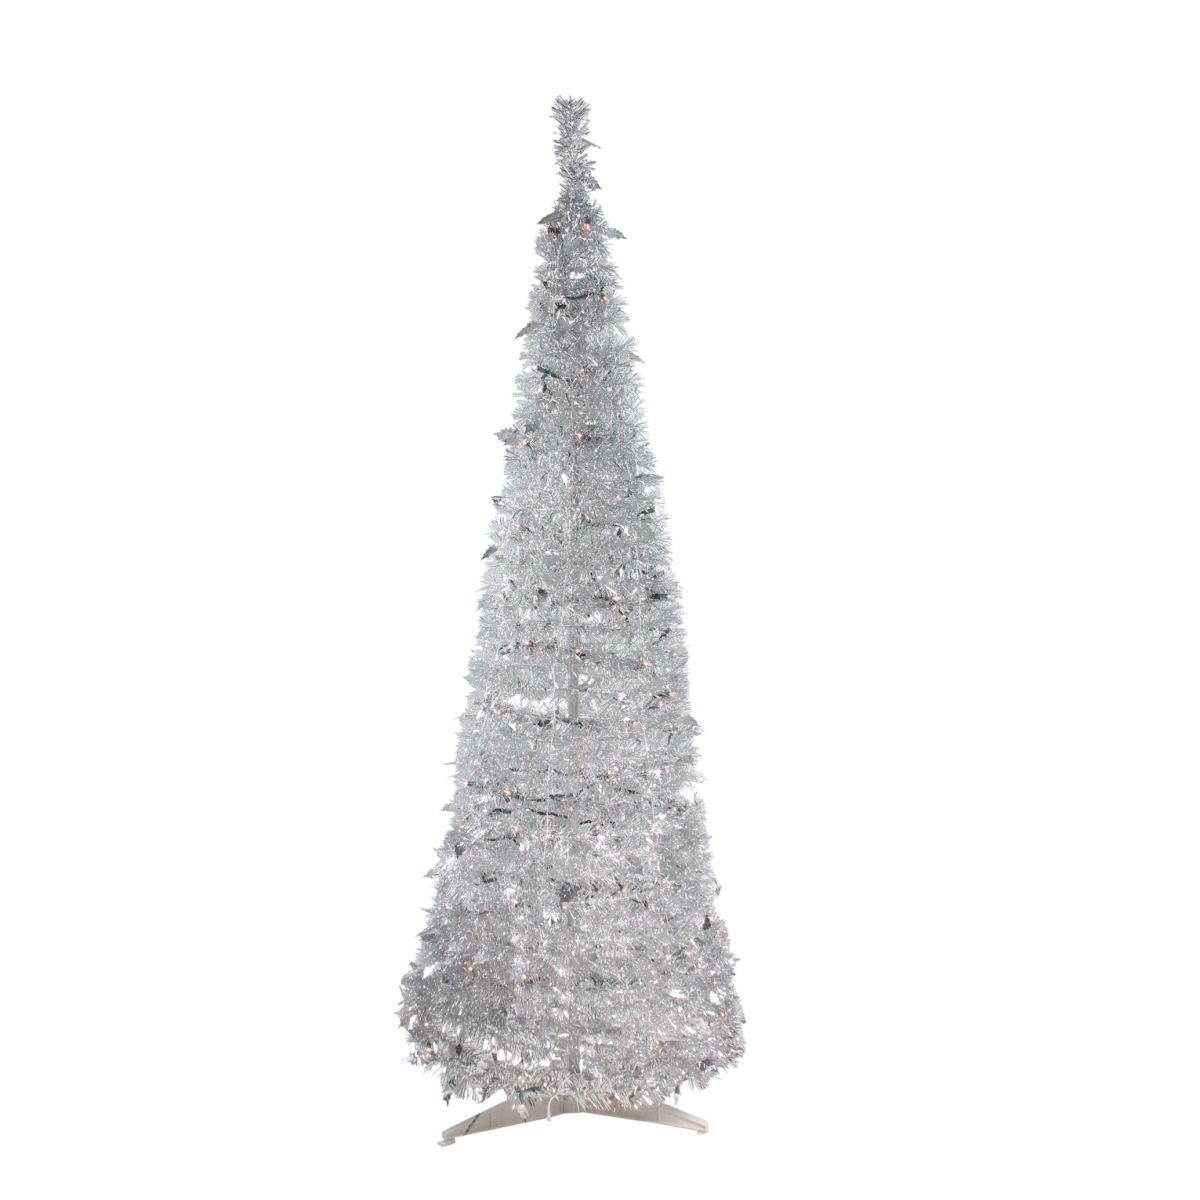 32911584 6 Ft. Pre-lit Silver Tinsel Pop-up Artificial Christmas Tree - Clear Lights